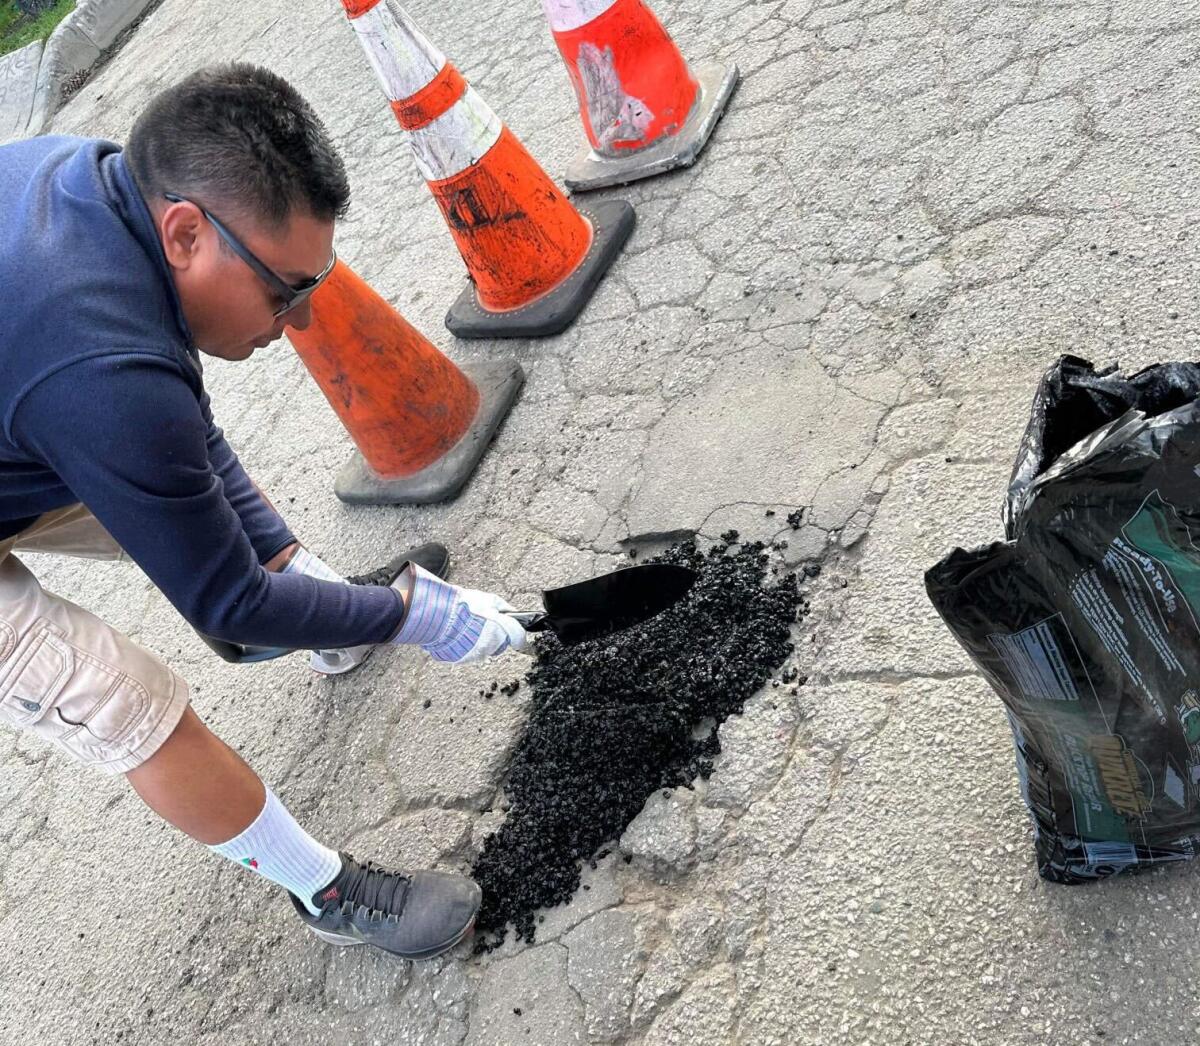 A Compton couple fixed neighborhood potholes. The city has ordered them to stop